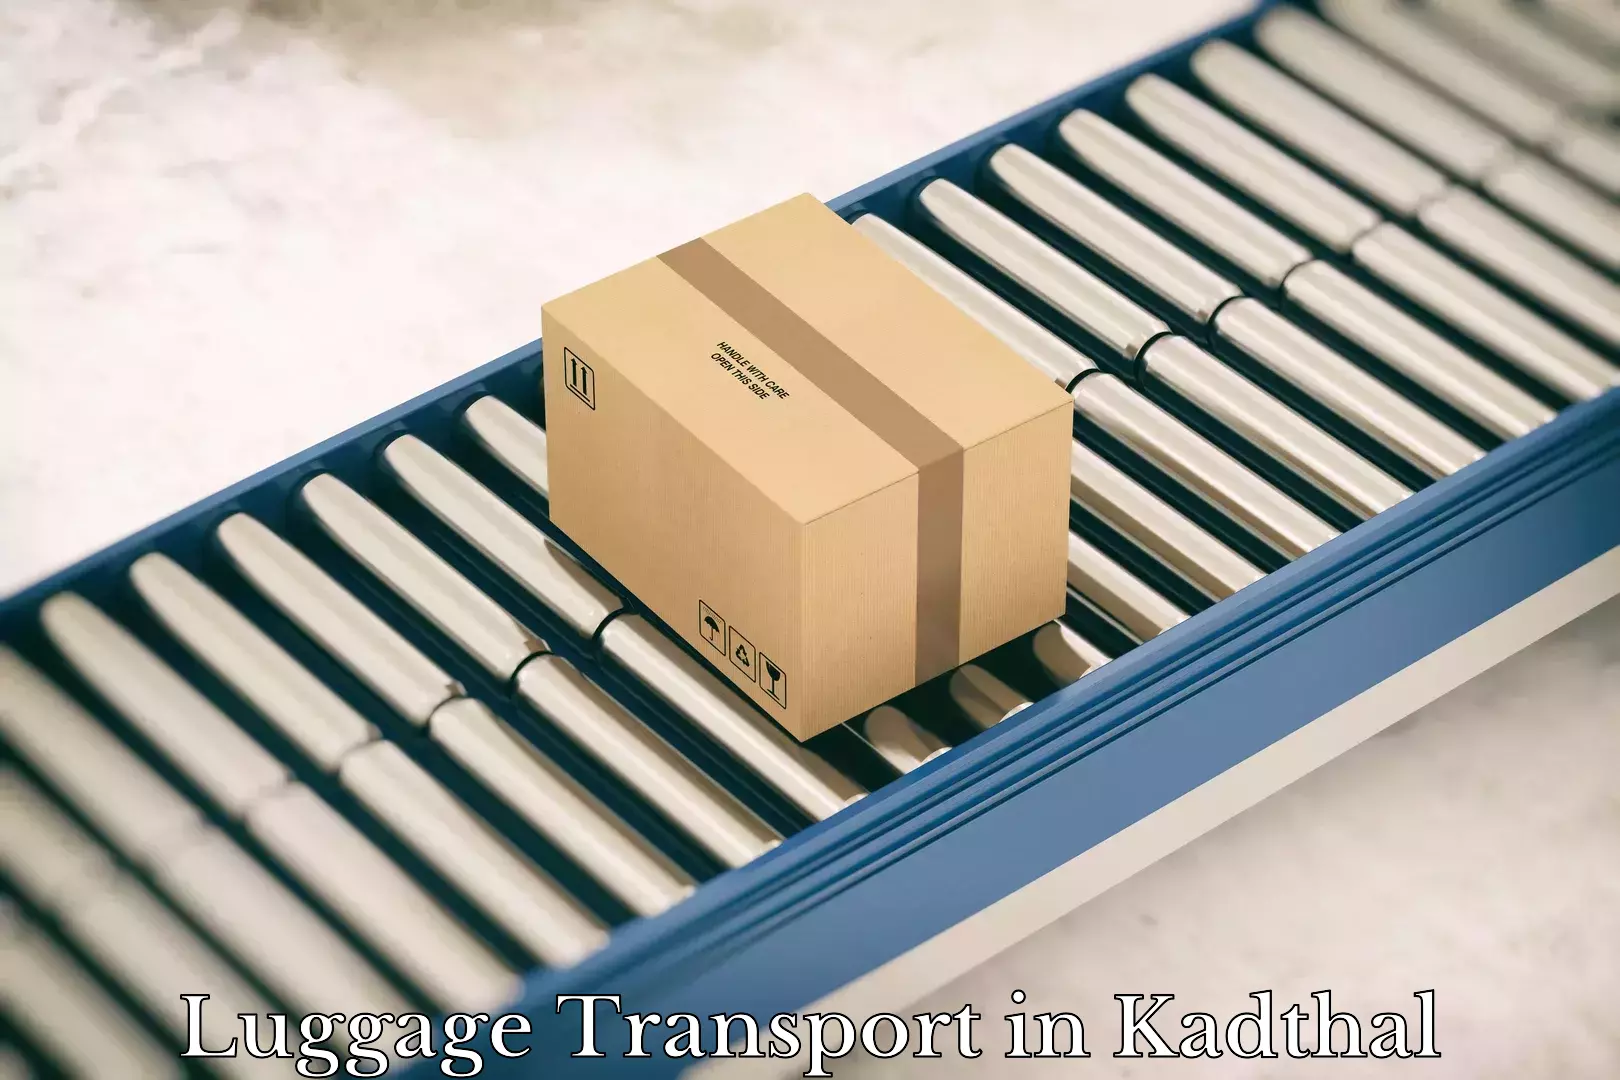 Baggage transport technology in Kadthal